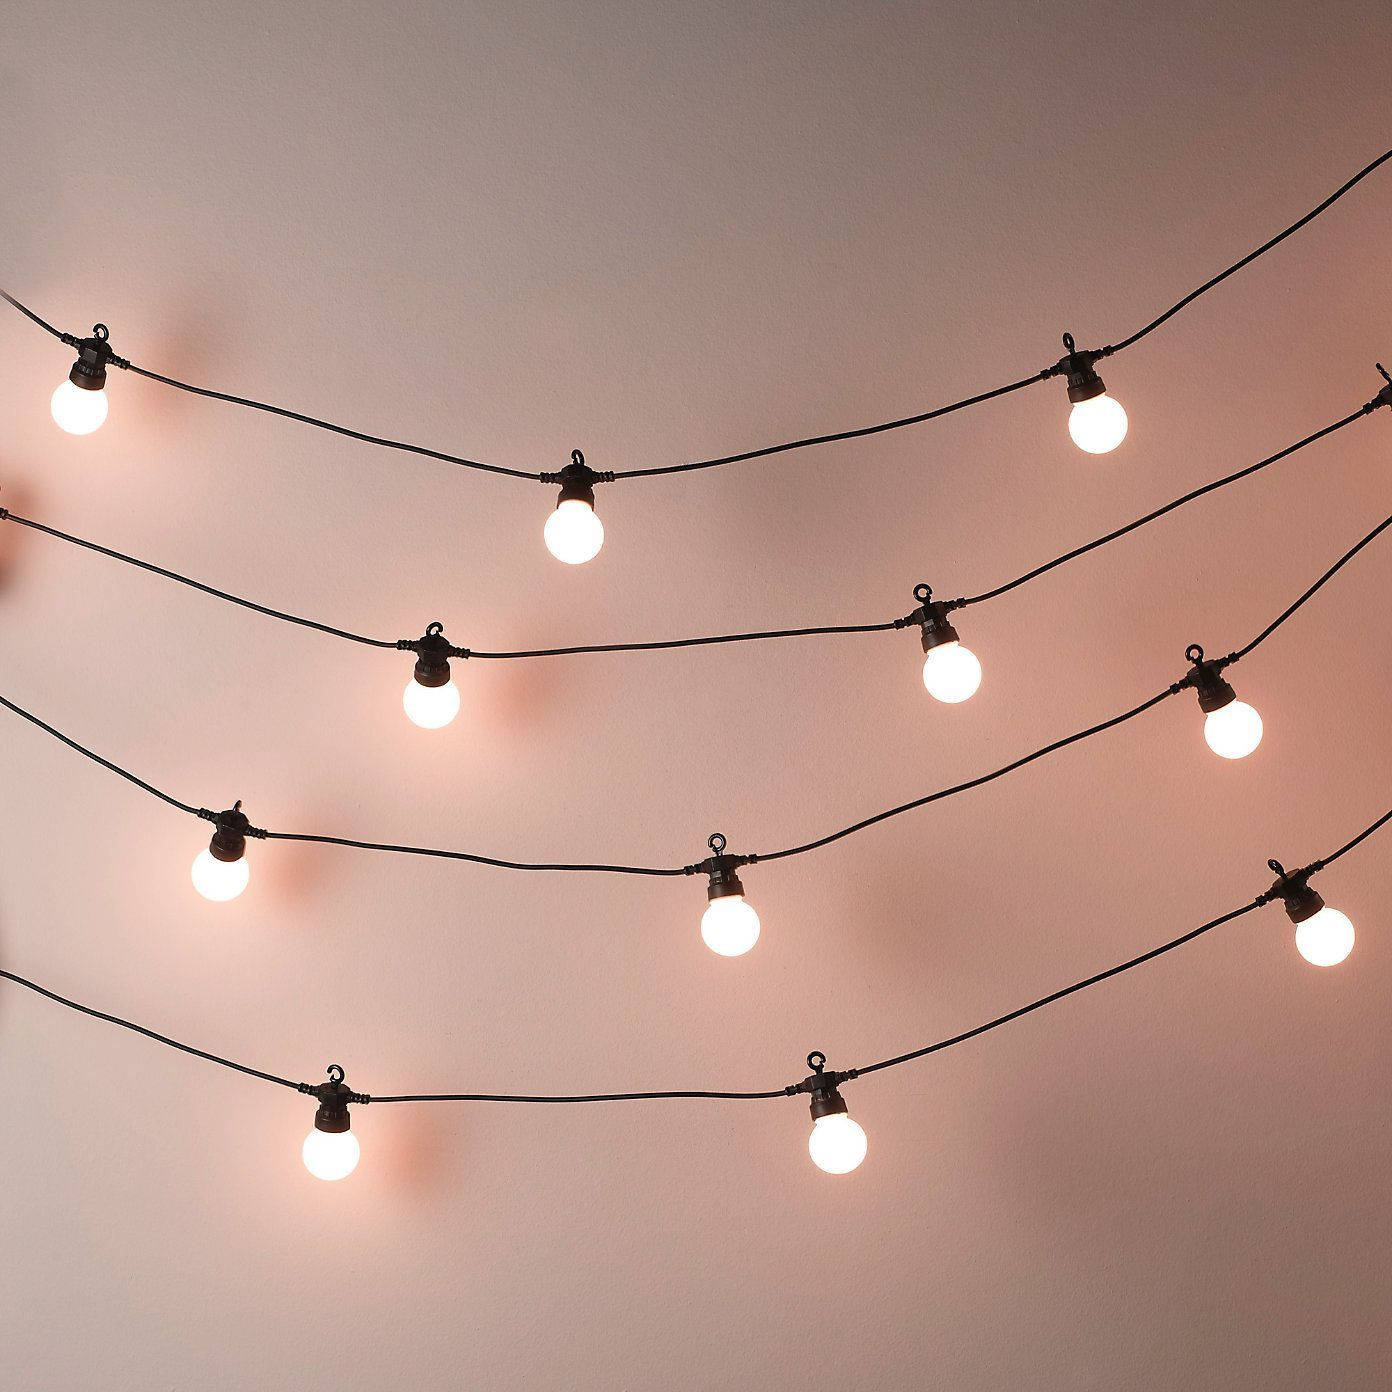 Bulb lights on a string hanging from a ceiling - Fairy lights